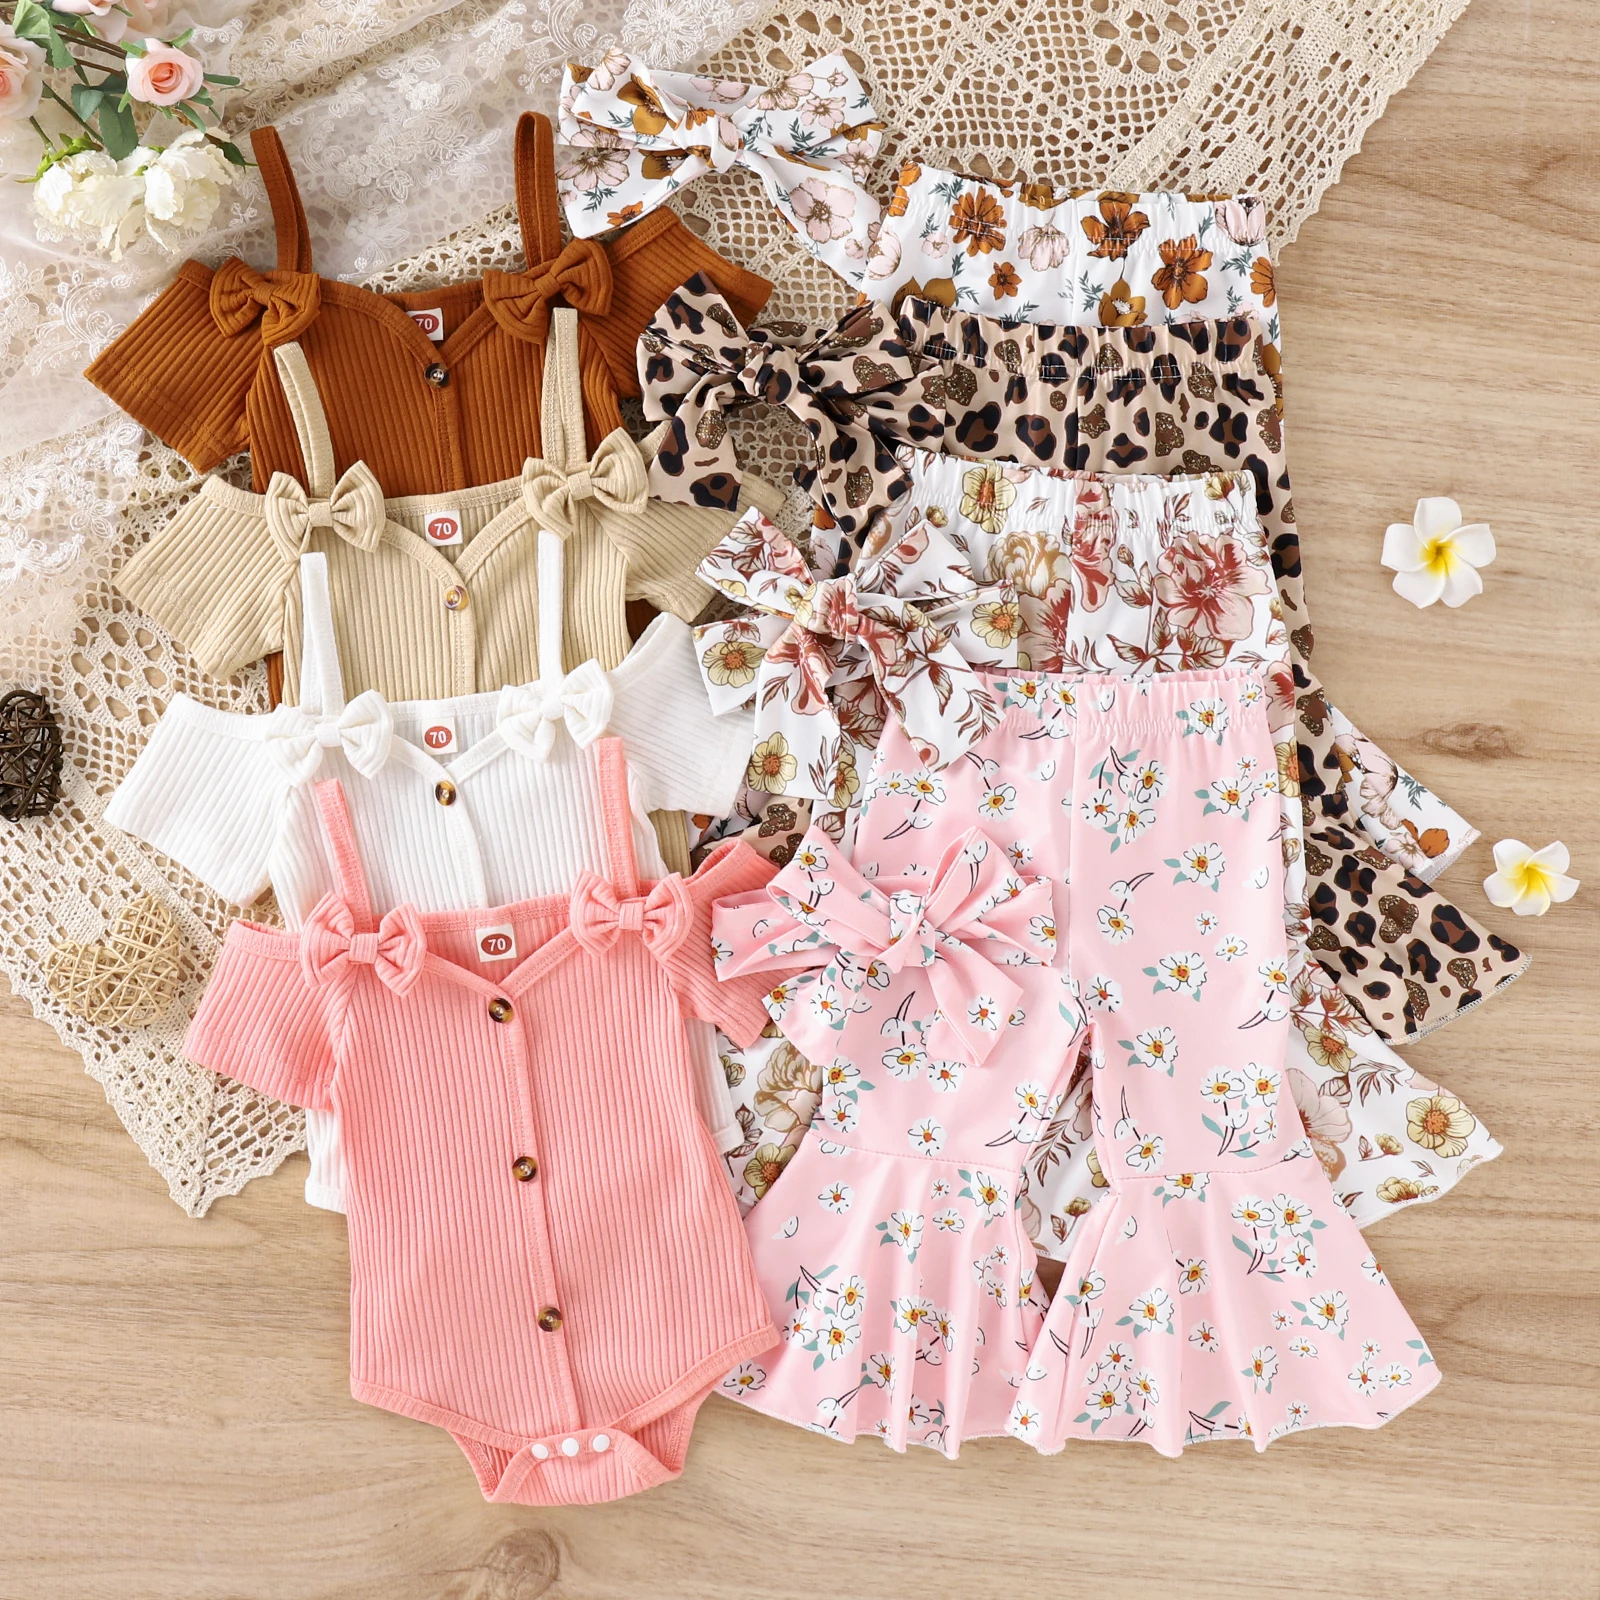 

3Pcs Set Infant Baby Girl Clothes Suspenders Short Sleeve Ribbed Romper Flared Pants Set Headband 3pcs Summer Baby's Outfit